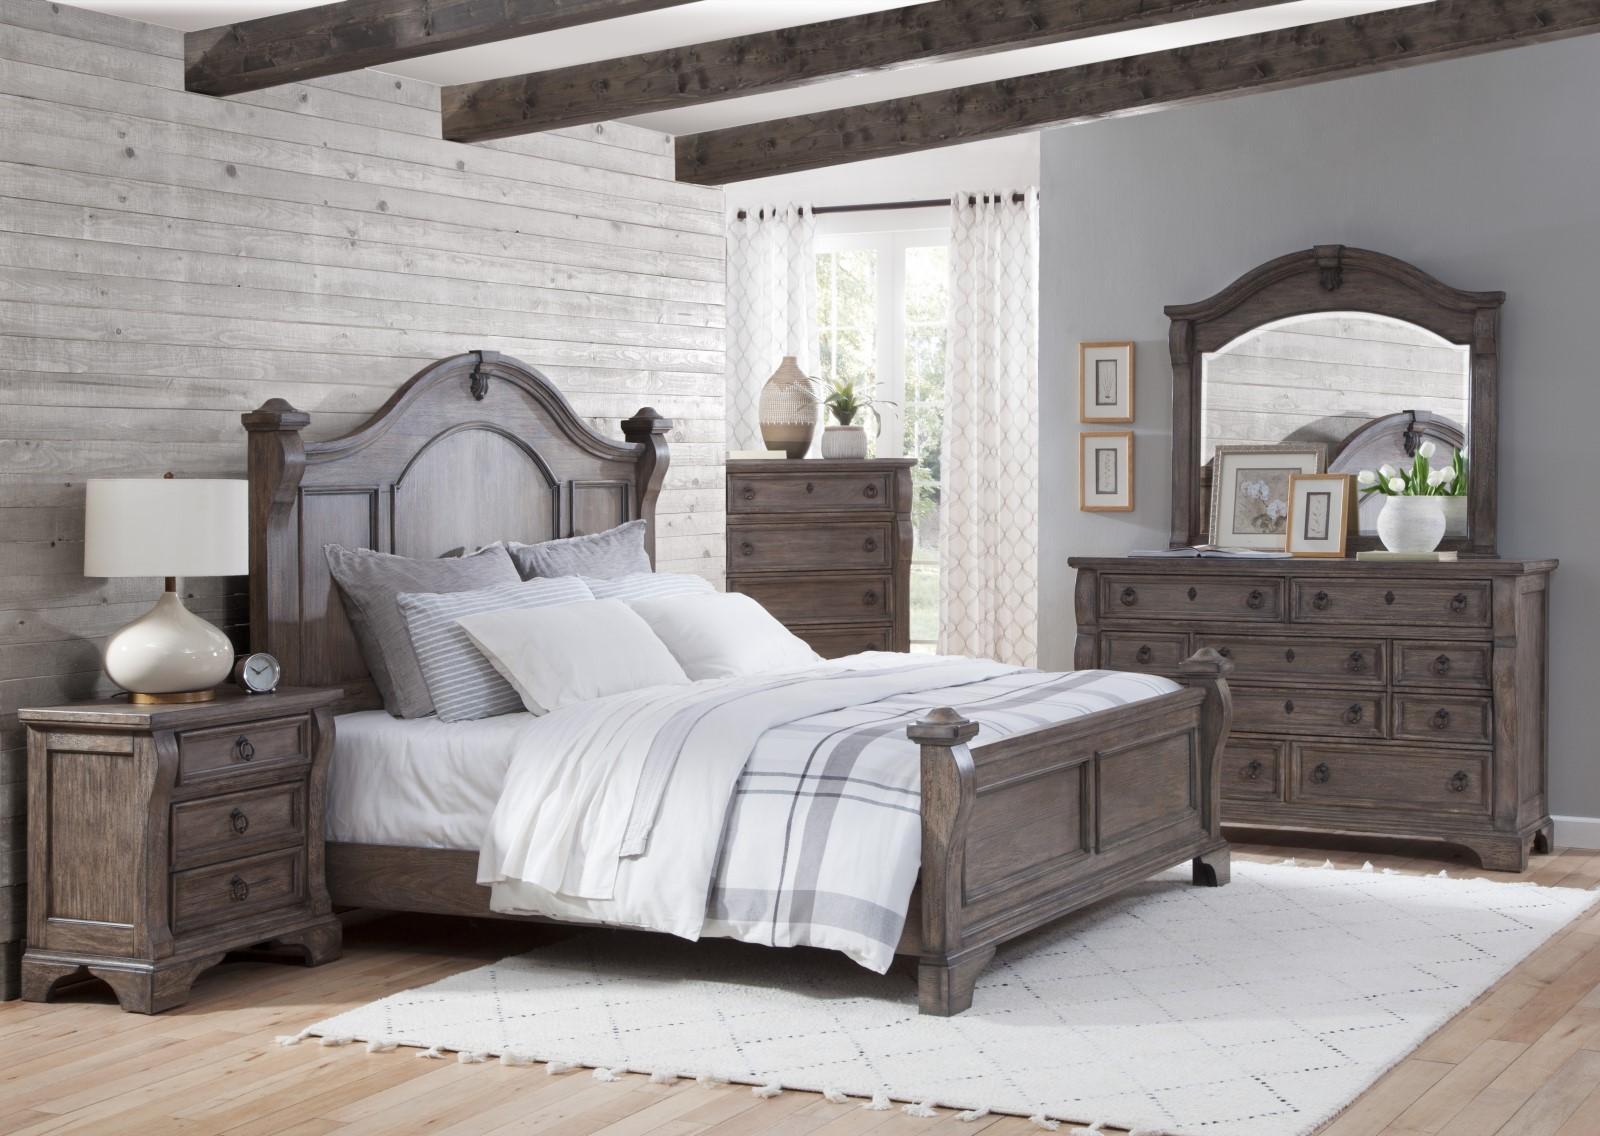 Classic, Traditional, Cottage Poster Bedroom Set HEIRLOOM 2975-50POS 2975-QPOPO-5PC in Charcoal 